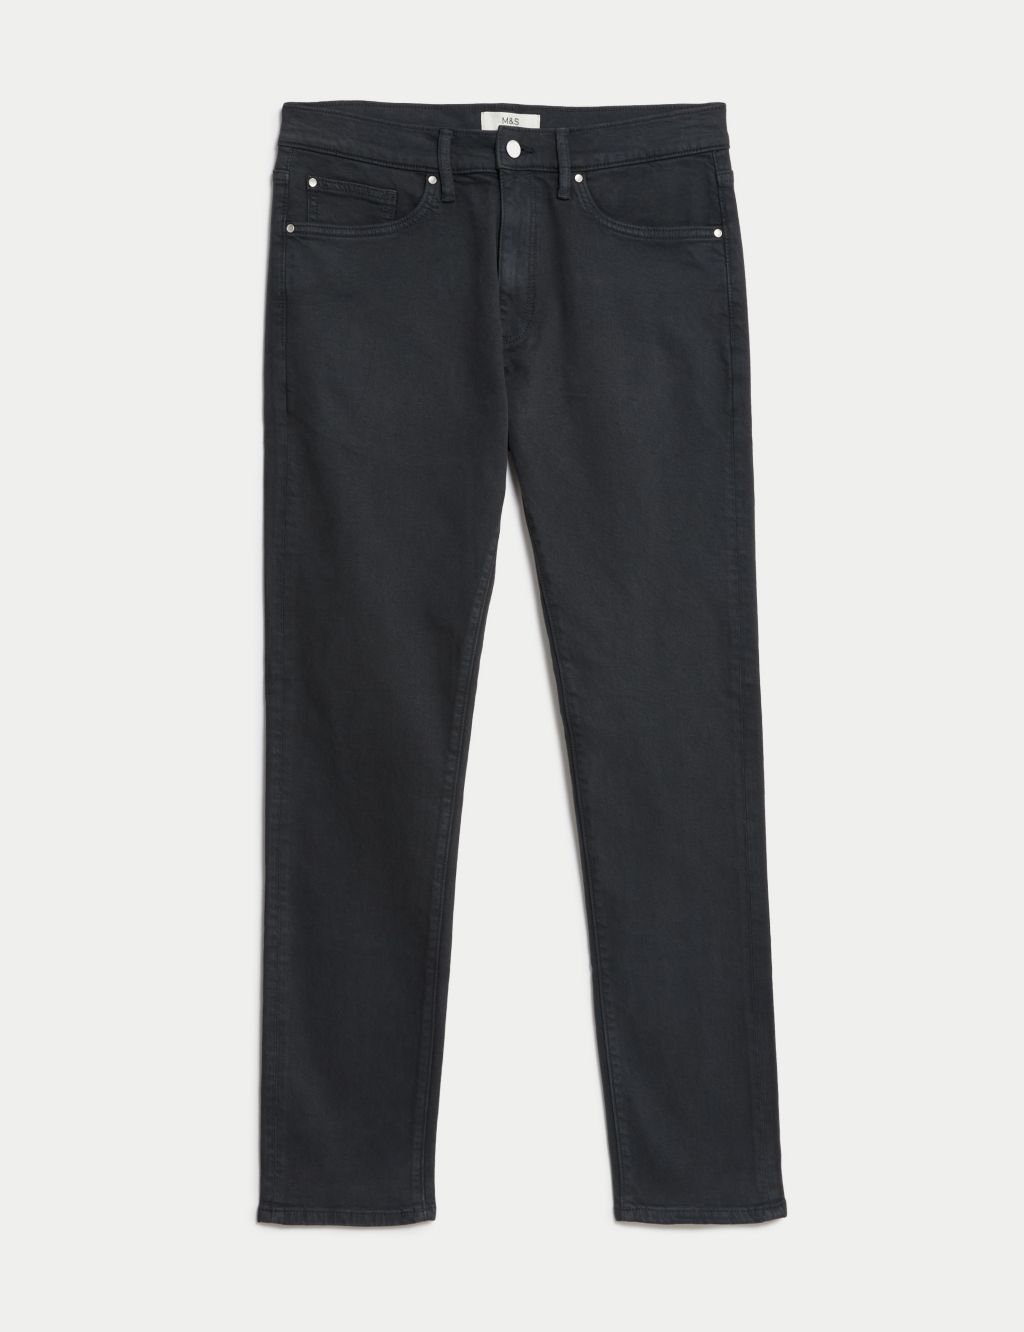 Slim Fit Tea Dyed Stretch Jeans image 2